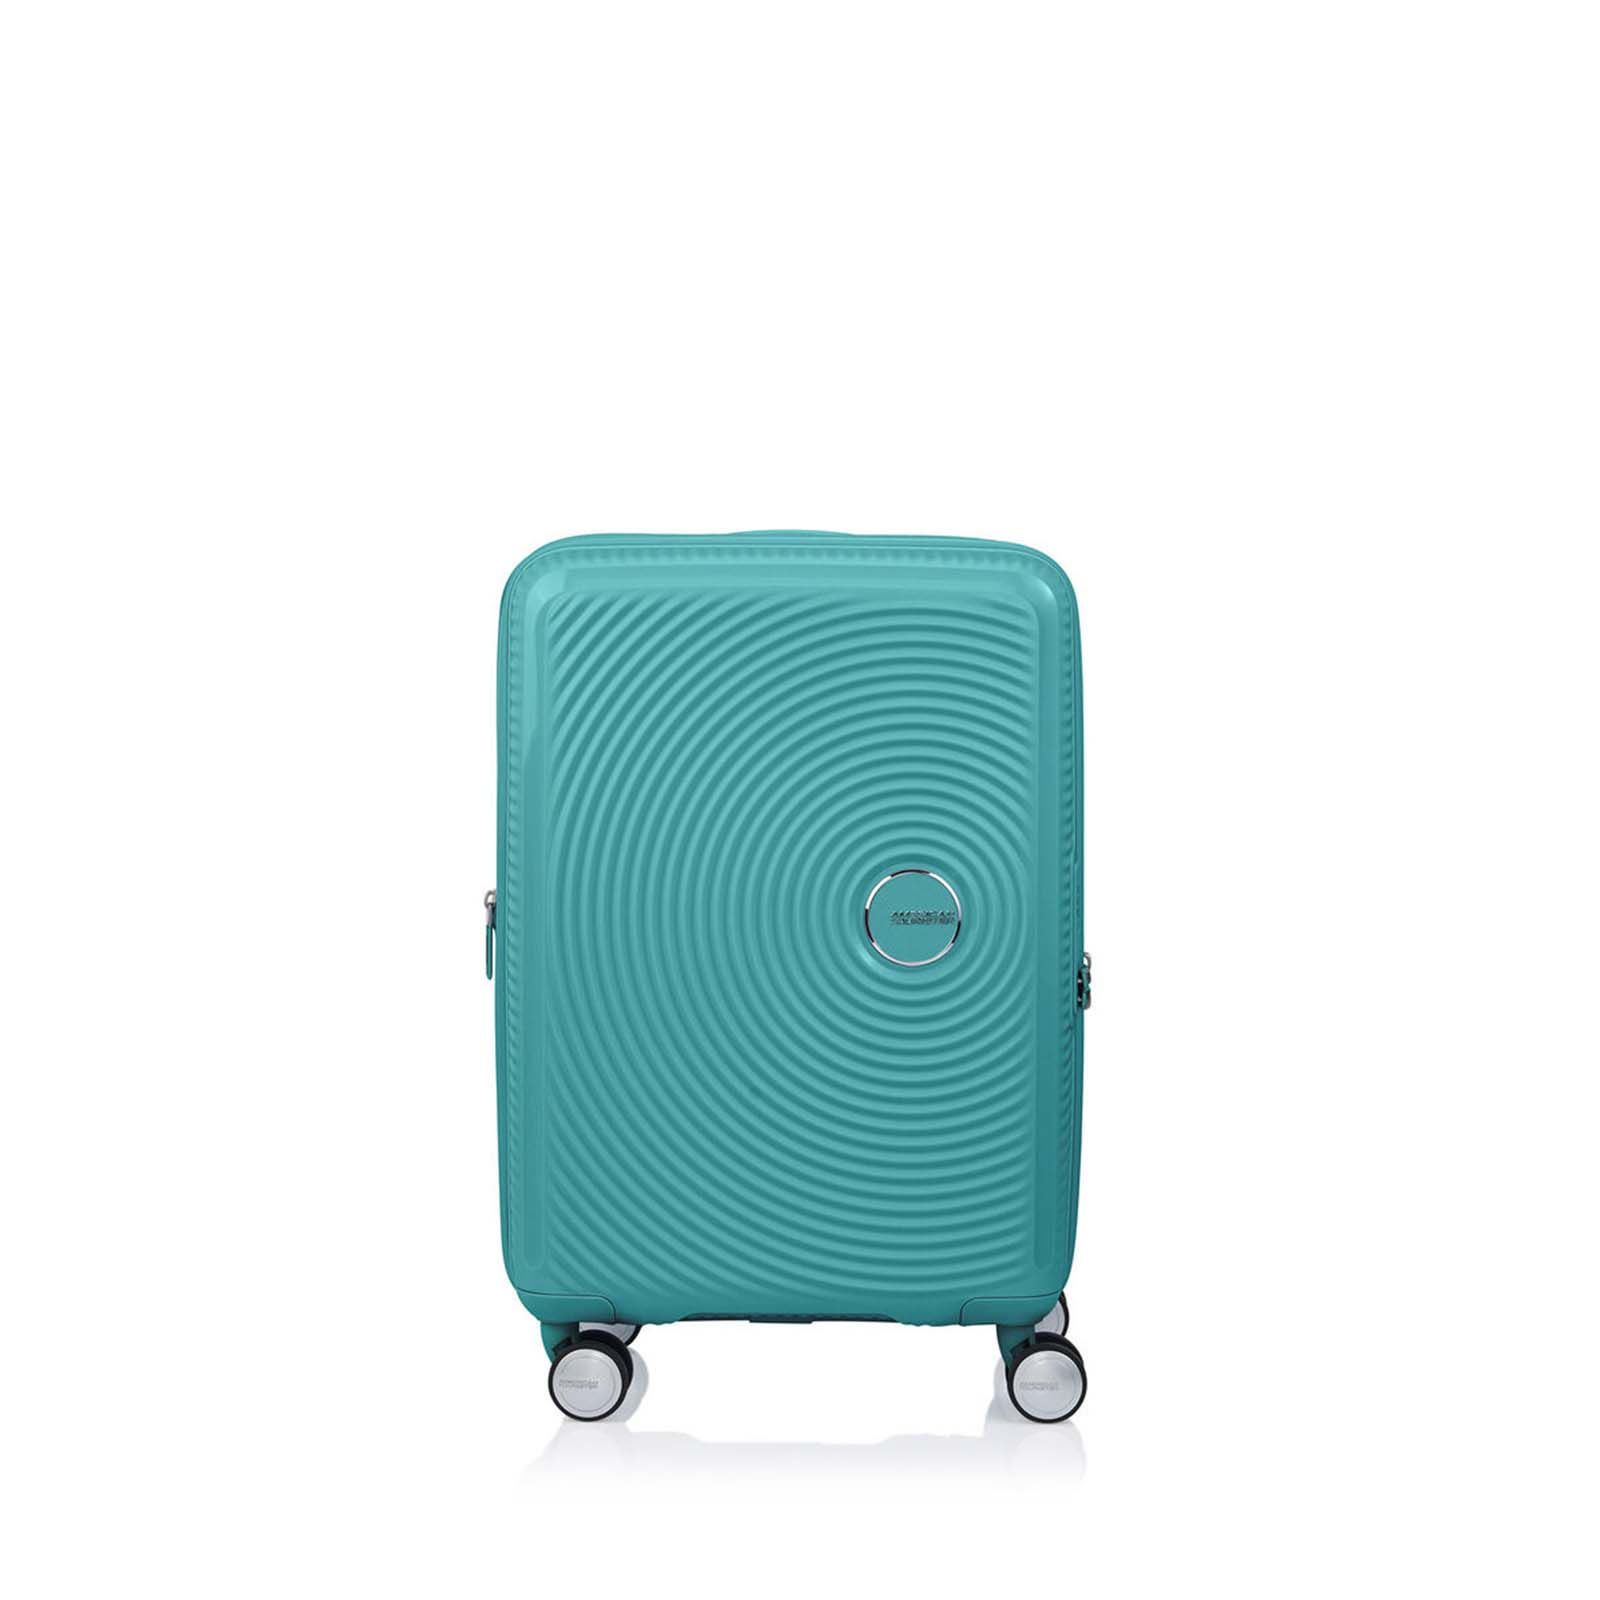 American-Tourister-Curio-2-55cm-Carry-On-Suitcase-Jade-Green-Front